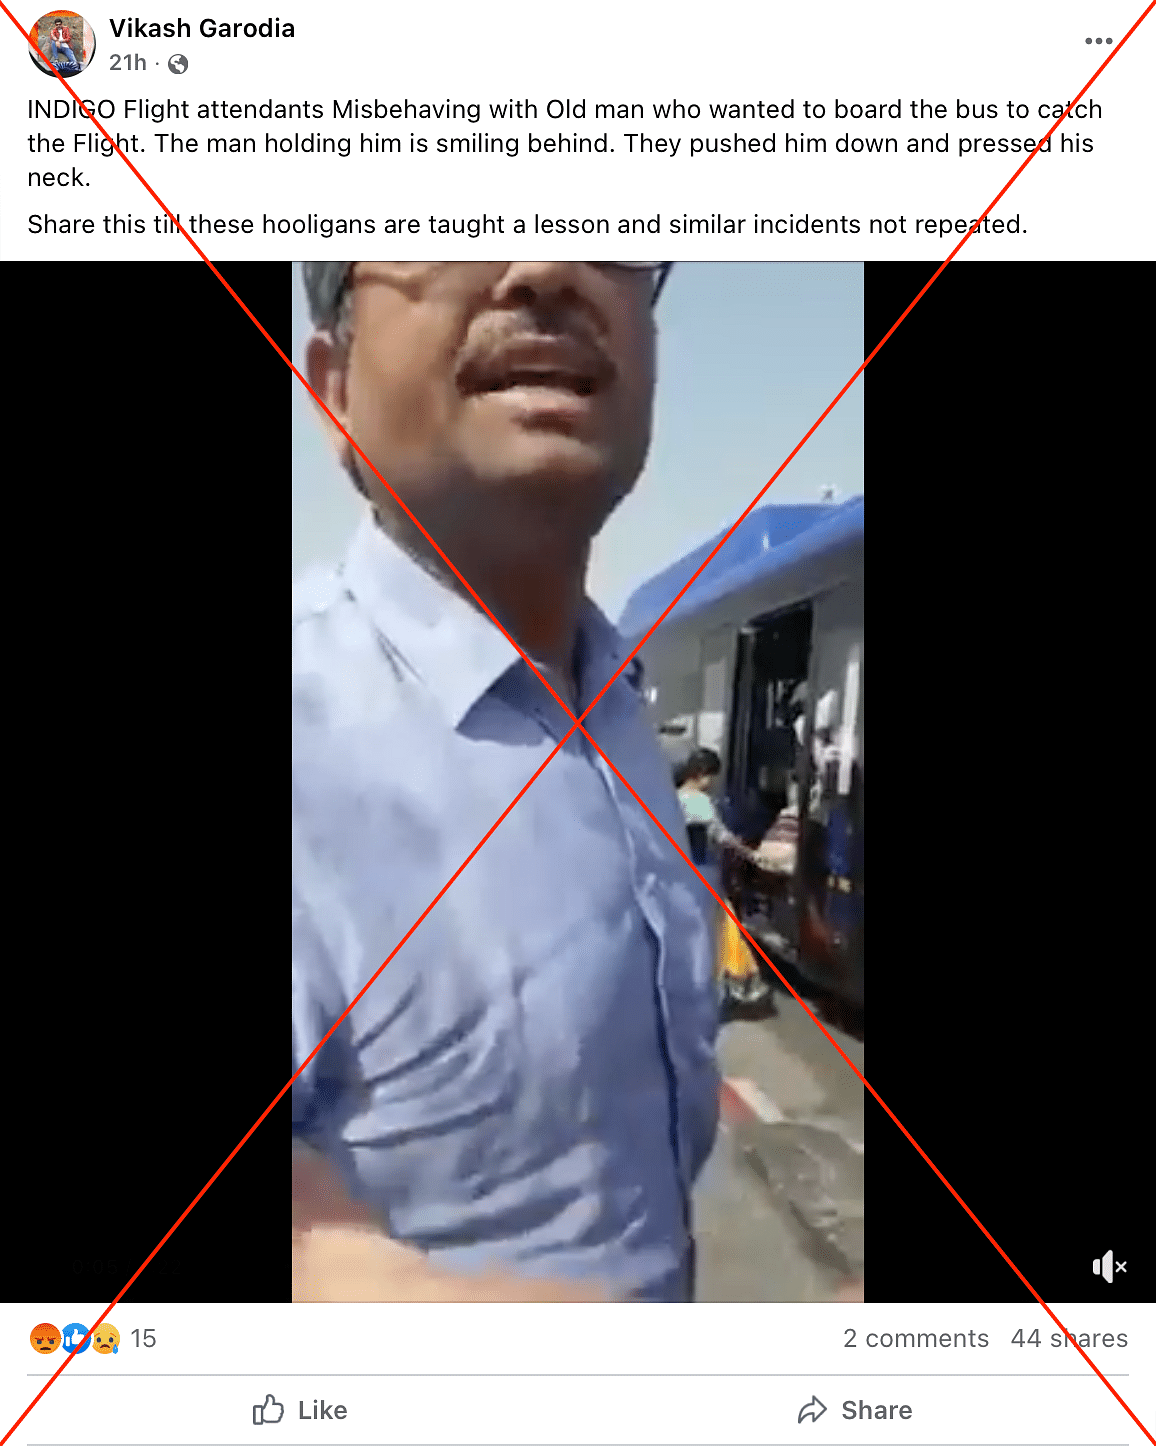 The video dates back to October 2017, when Rajeev Katyal was assaulted by IndiGo staffers at Delhi's IGI airport.